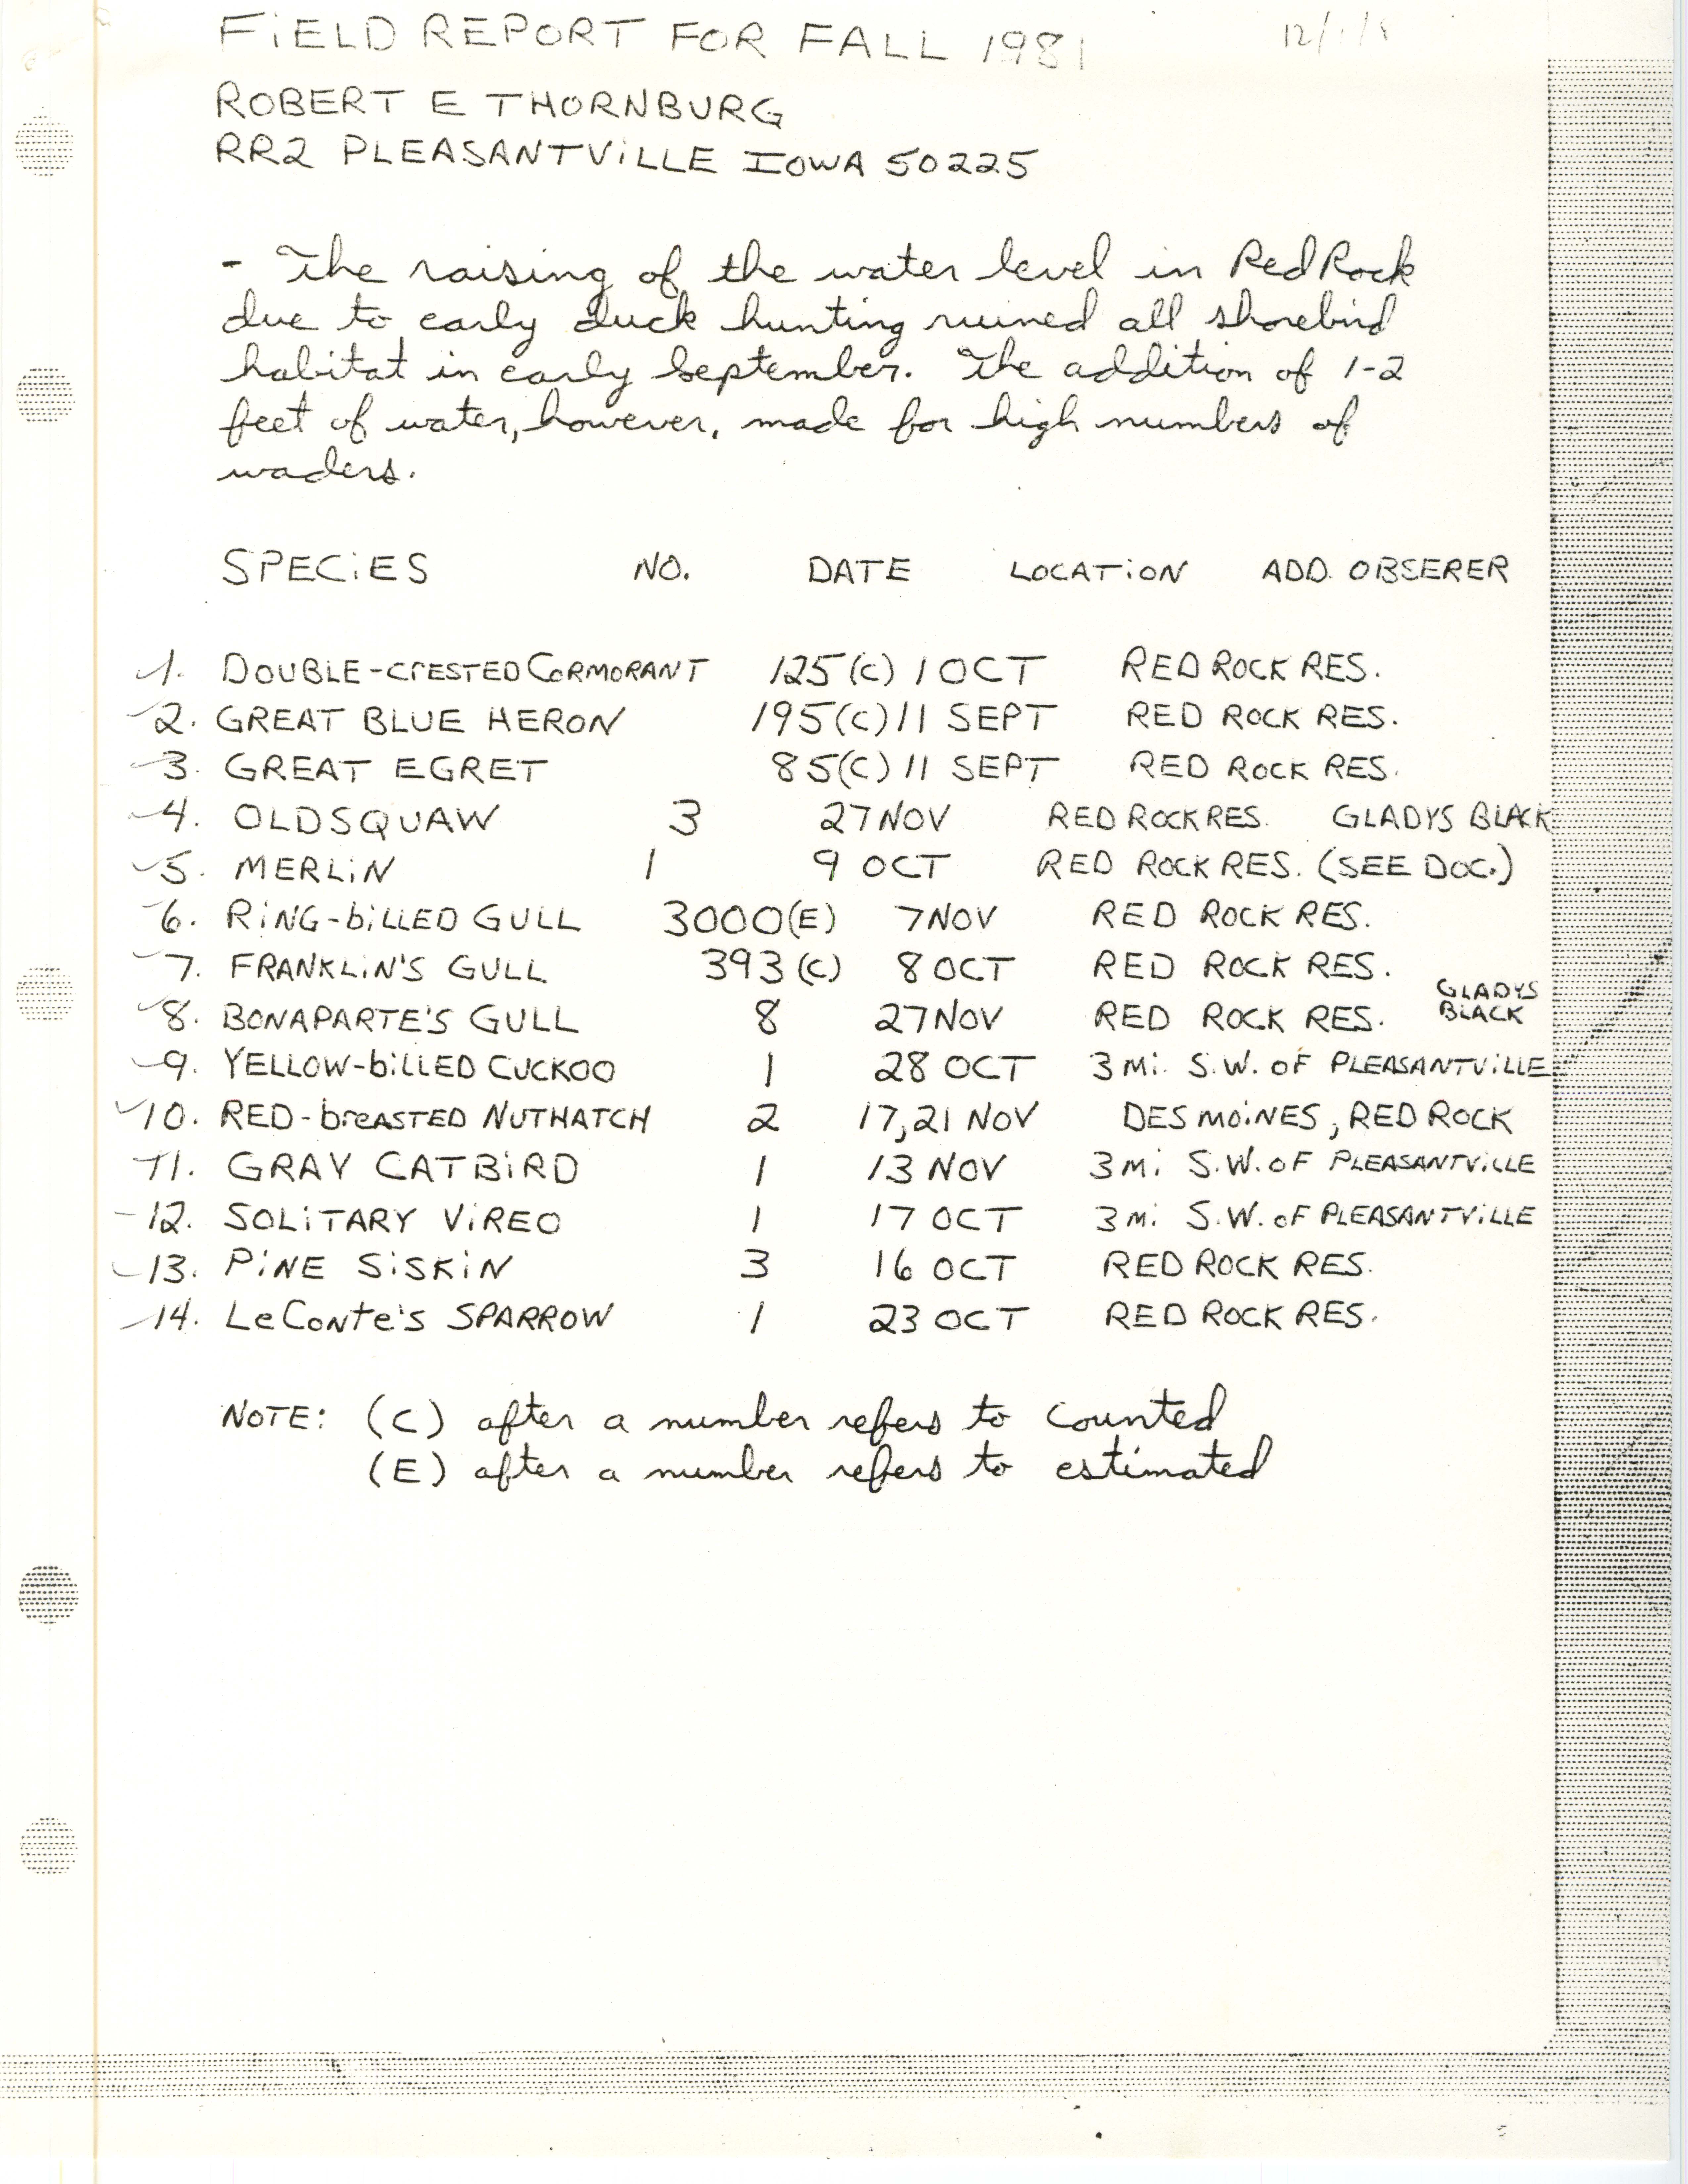 Field notes contributed by Robert E. Thornburg, fall 1981